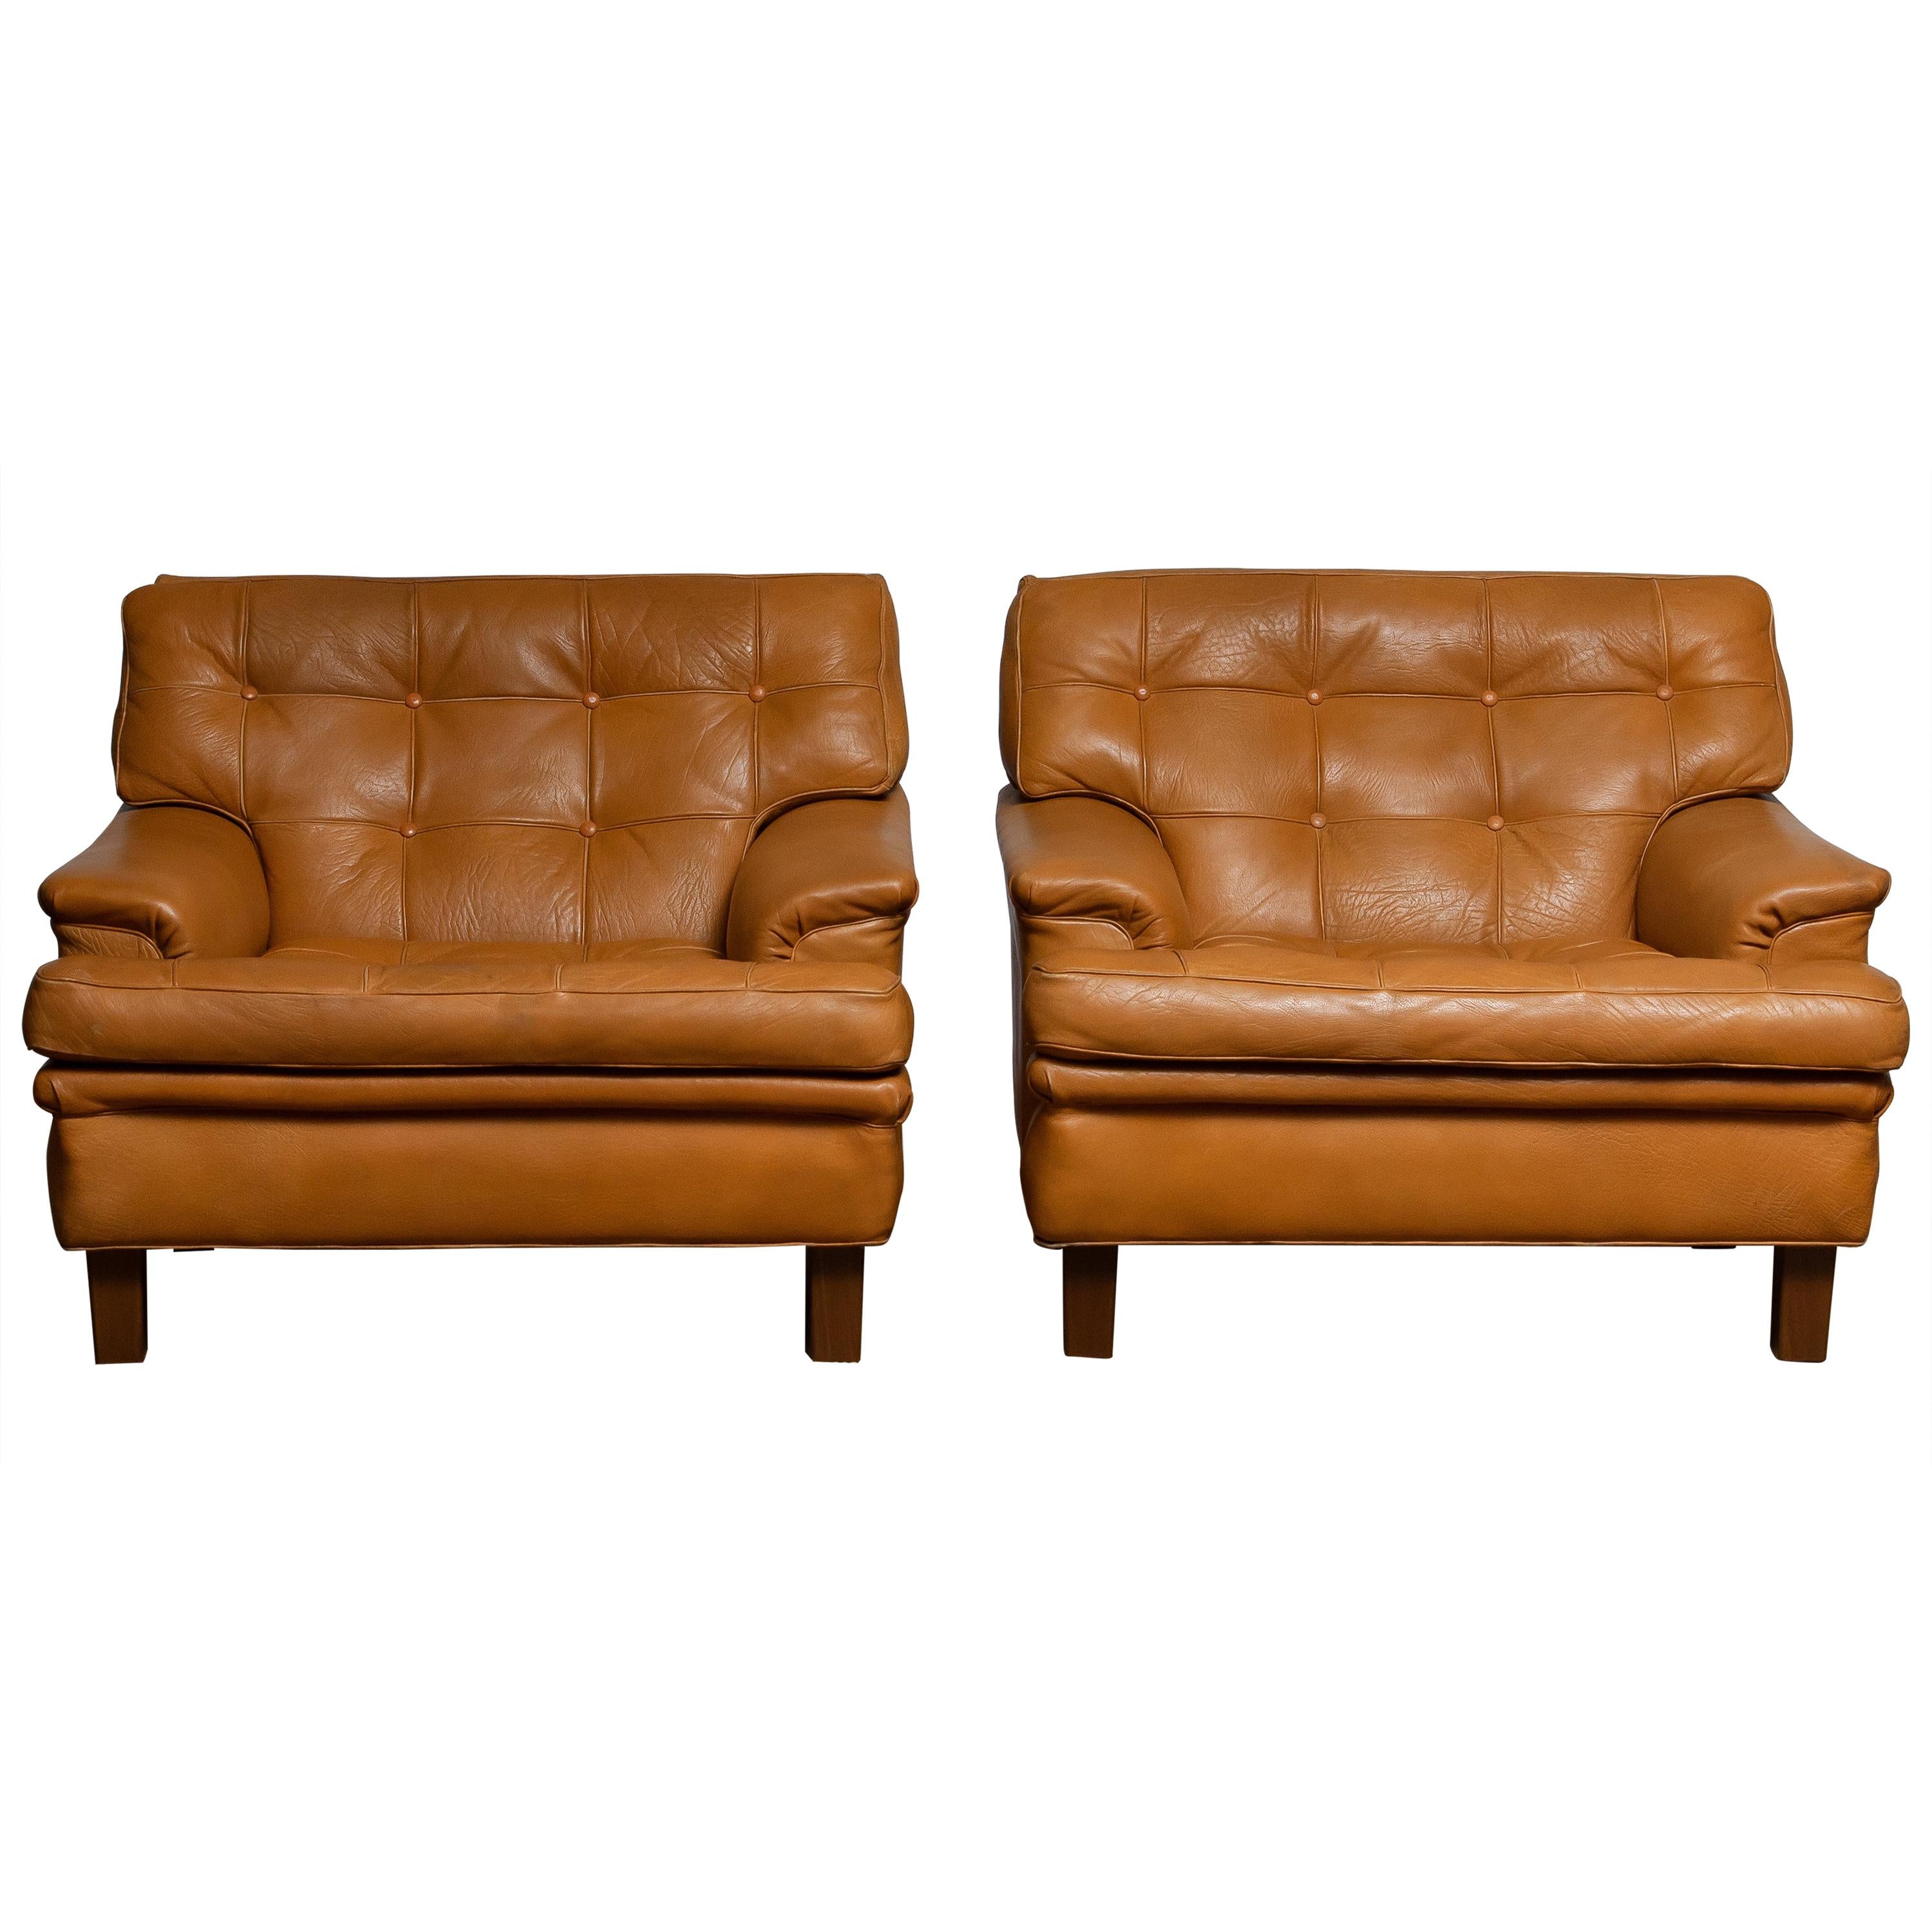 Pair of Quilted Buffalo Leather "Merkur" Chairs by Arne Norell A.B. Sweden 1960s